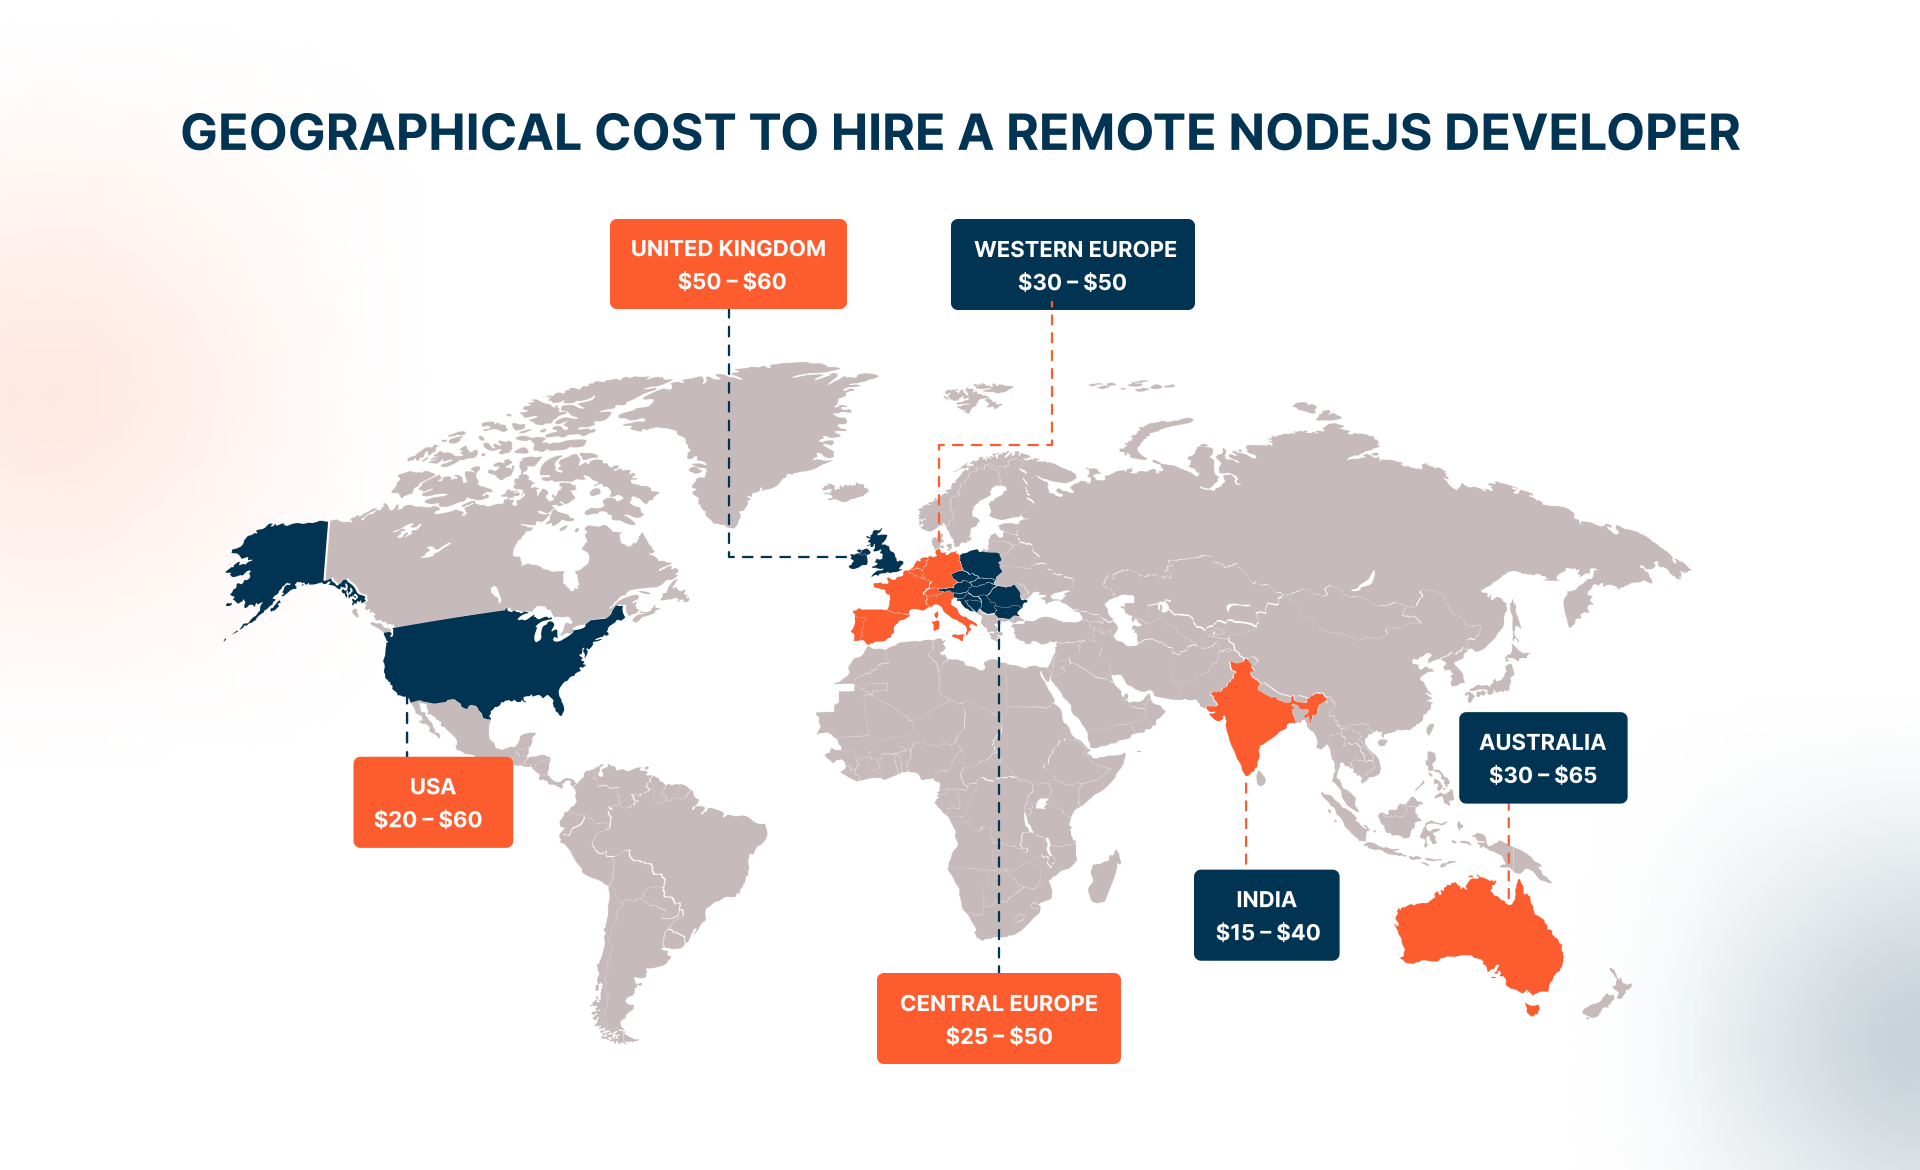 Geographical Cost to Hire a Remote NodeJS Developer